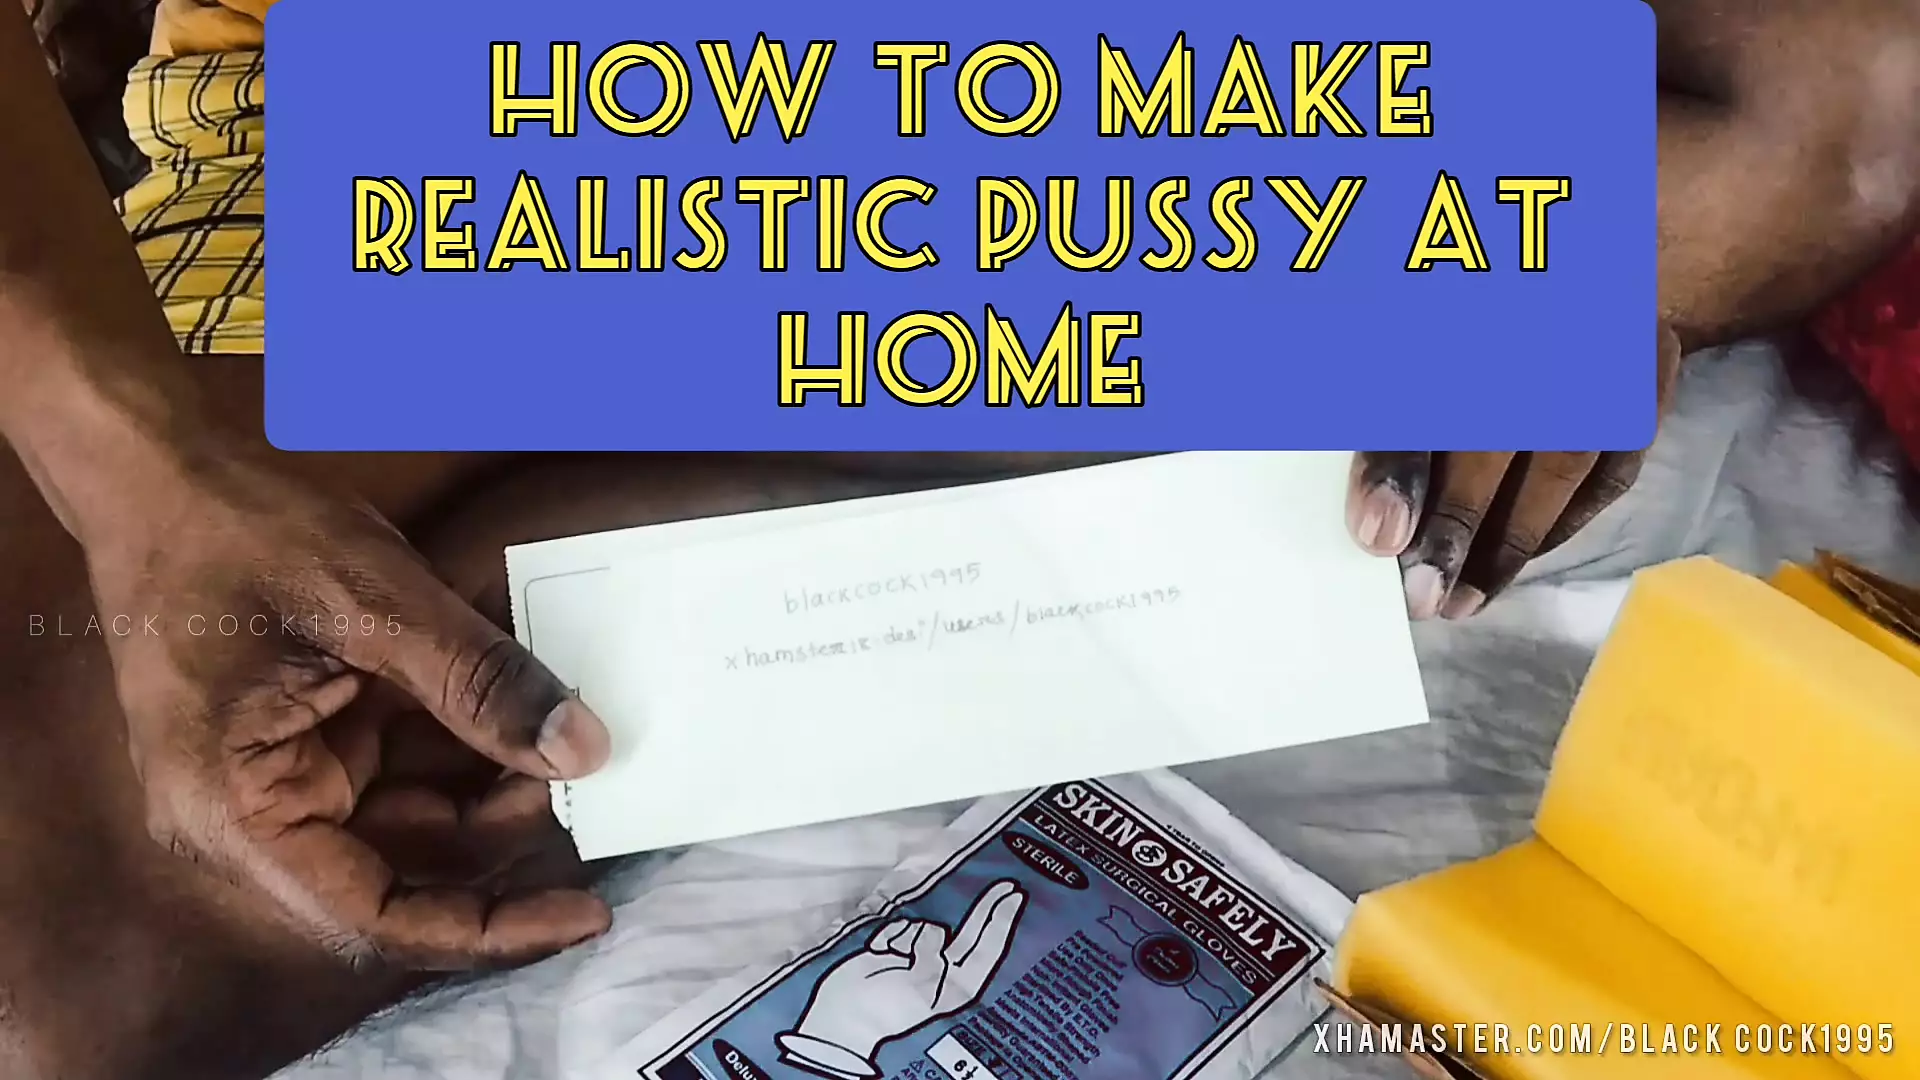 How To Make A Toy Vagina Or Anus At Home And How To Make A Sex Toy At Home By Blackcock1995 image